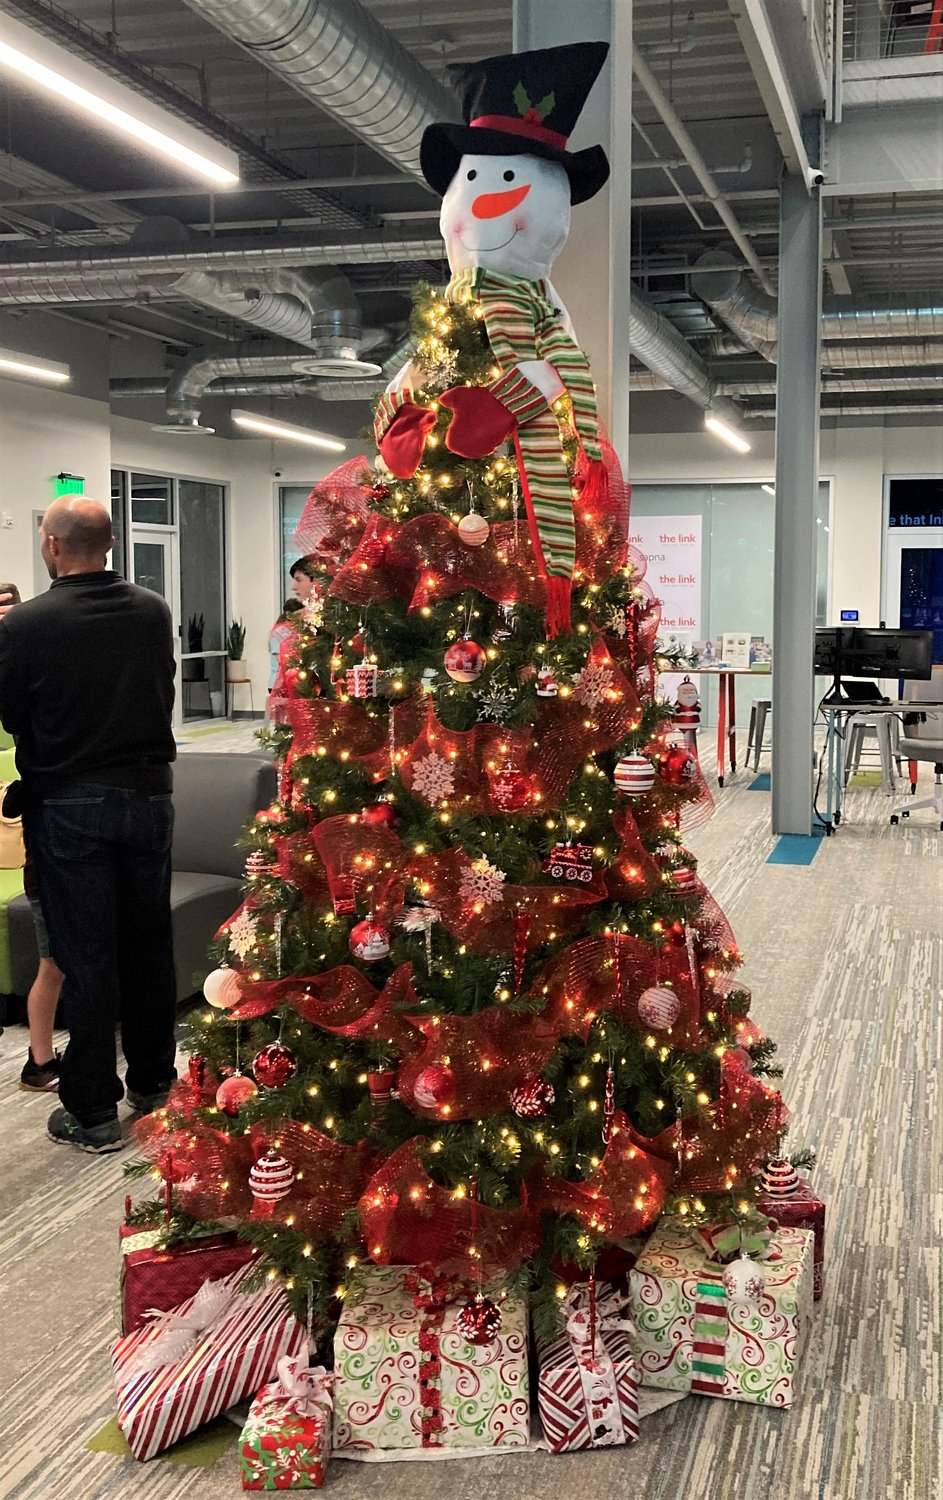 A whimsical holiday tree at the link.